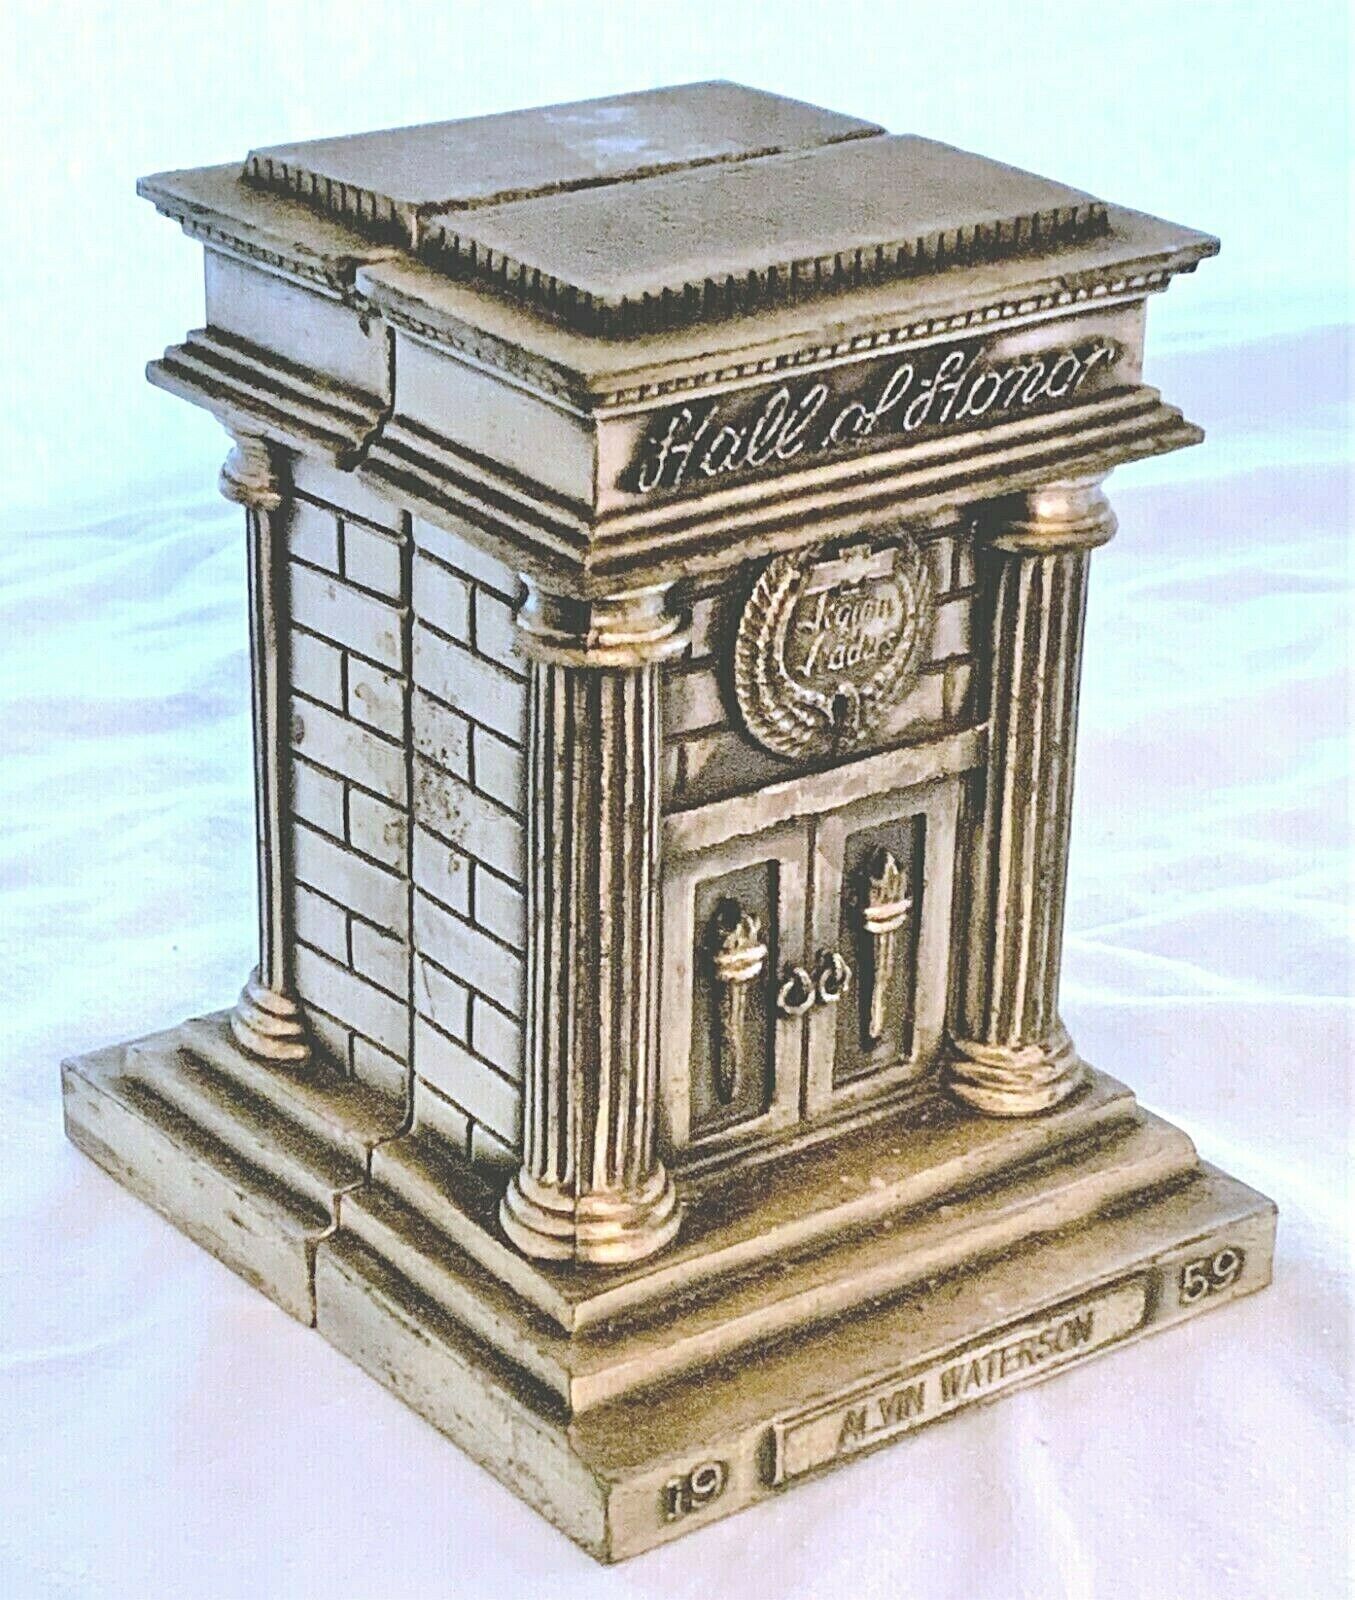 CHEVY HALL OF HONOR METAL SOUVENIR BUILDING BOOKENDS 1959 CLASSICAL TEMPLE